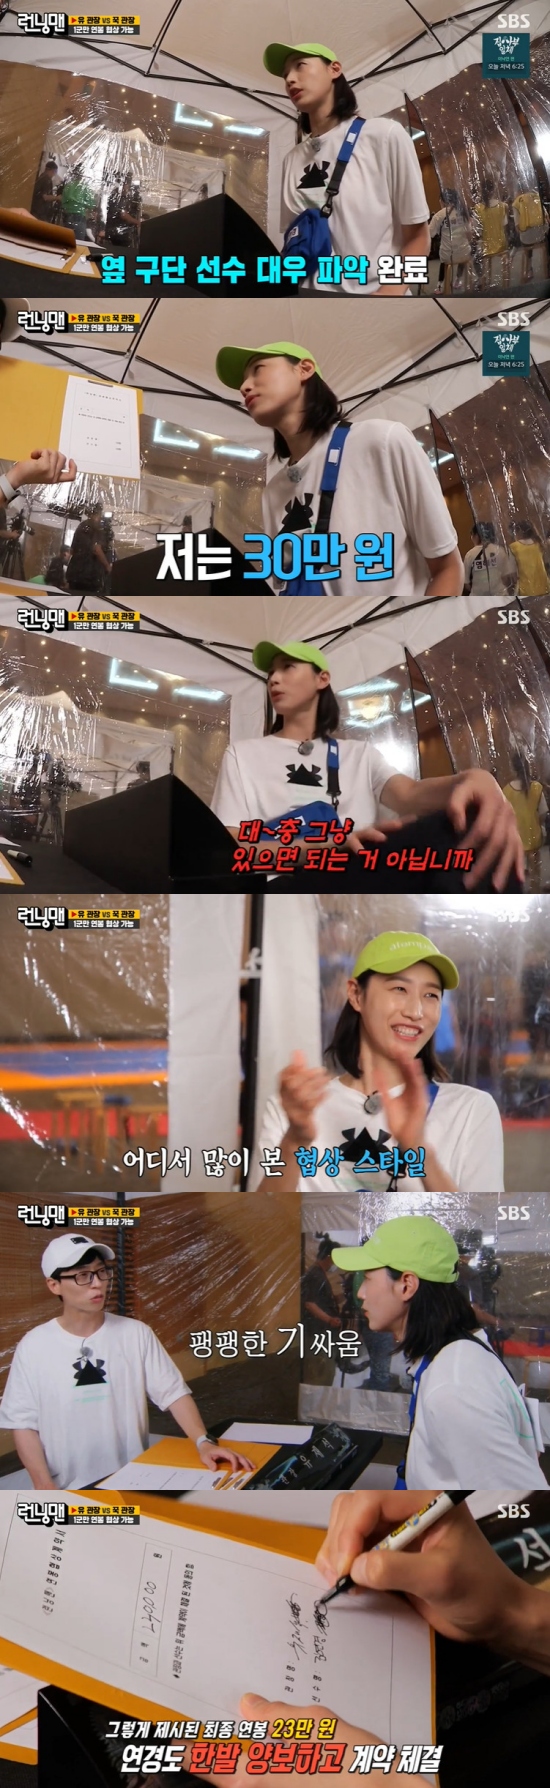 On SBS Running Man broadcasted on the 3rd, Yoo Jae-Suk and Kim Jong-kook were decorated with Yoo Jang-jang vsuk director Race, and the scene of the salary Movie - The Negotiation with the players was broadcast.After the first mission footwear match, the salary Movie - The Negotation was held, and Yoo Jae-Suk and Kim Jong-kook each Choices the first team players.Yoo Jae-Suk Choices Yeum Hye-Seon, Kim Yeon-koung, Yang Se-chan, and Kim Jong-kook Choices Lee So Young, Oh Ji Young and Kim Hee-jin.First to Movie - The Negotiation, Oh Ji-yeong Jessie 500,000 One to Kim Jong-kook.Kim Jong-kook said he would give 200,000 One, and Oh Ji-yeong decided to stay with 200,000.In particular, Kim Hee-jin boasted his loyalty to his fellow players, saying, I will receive 170,000 One, so please raise only one in the second group.Kim Jong-kook readily accepted Kim Hee-jins offer; Lee So-young also had a salary of 170,000 One.However, Yoo Jae-Suk cut 20,000 Ones from Yeum Hye-Seons existing annual salary of 140,000 Ones, and finally signed 120,000 Ones.Yang Se-chan was happy to receive 30,000 One, and he received a lot.Yang Se-chan was mistaken for Movie - The Negotiation going on with 200,000 One for the footwear match, not the cumulative amount. Yang Se-chan later learned the truth and said, I was hit.Kim Yeon-koung also actively tried Movie - The Negotiation, knowing that his salary was lower than that of Kim Jong-kooks players.Kim Yeon-koung said: You have to give it well; you have to give me the first Jessie amount well; Ive known how I treat you outside.Kim Yeon-koung reveals he has a desired salary of 300,000 OneKim Yeon-koung lied, saying, They said they got 300,000 Ones, and Yoo Jae-Suk immediately noticed the lie.Yoo Jae-Suk quivered, saying, Youre a miner.Kim Yeon-koung has been told several times that he resembles Lee Kwang-soo with his big play as well as his big play.Kim Yeon-koung said, What strength can I do? I will do only 130,000 One. How can 130,000 One do it? Shouldnt I just stay still?I want to work hard. I want to be immersed here. I will have passion if you give me 300,000 One. Yoo Jae-Suk concluded the contract with 230,000 One.Photo = SBS broadcast screen